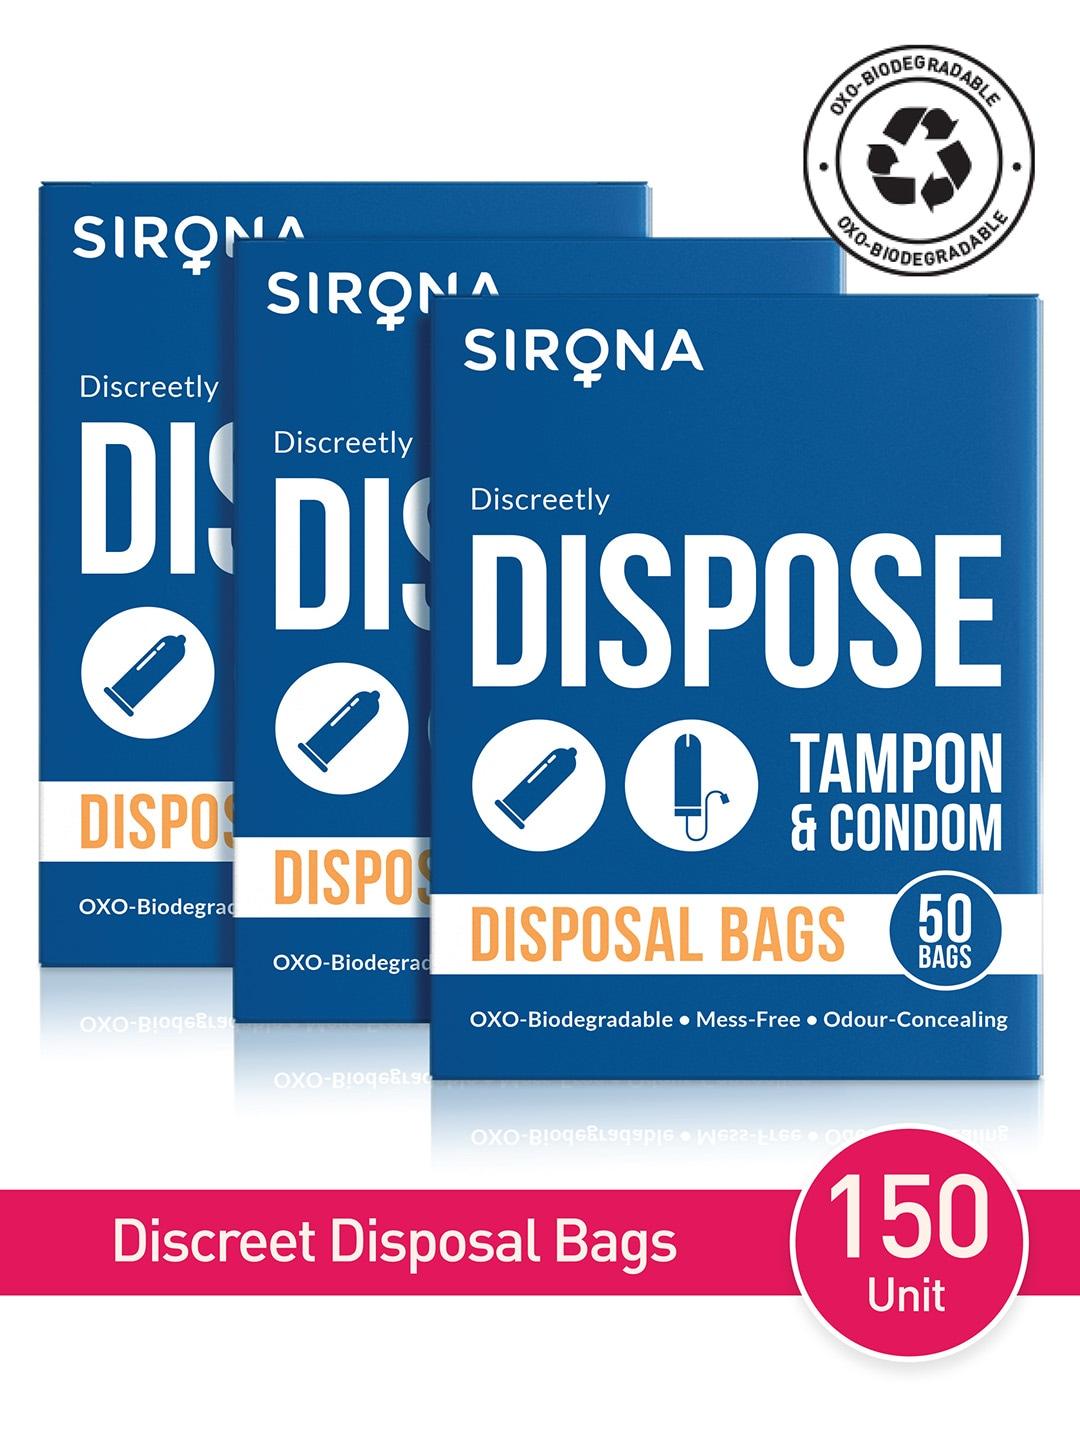 Sirona Unisex Pack of 3 Tampons and Condoms Disposal Bags - 50 Bags each